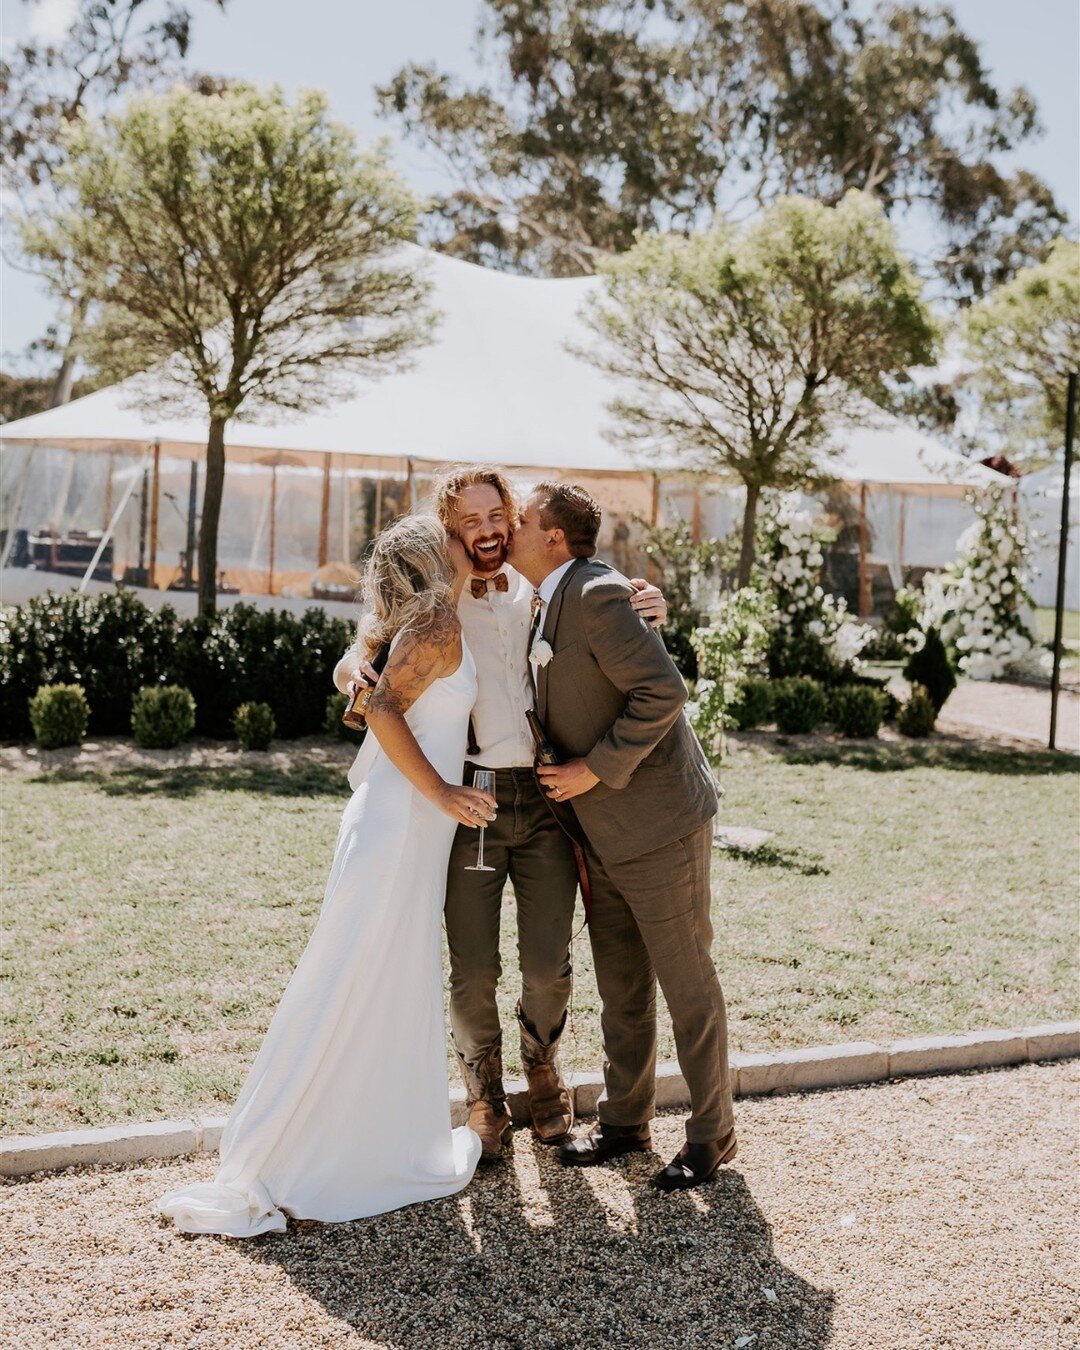 Cara &amp; Lachie giving me all the post hitchin lovin a man could need! 😘 

So happy to be on the road every week exploring new places and whipping my couples into married life.
Bloody love it! 😍

📸 @wanderandfollowimages 
📍 Armidale

#holymatri